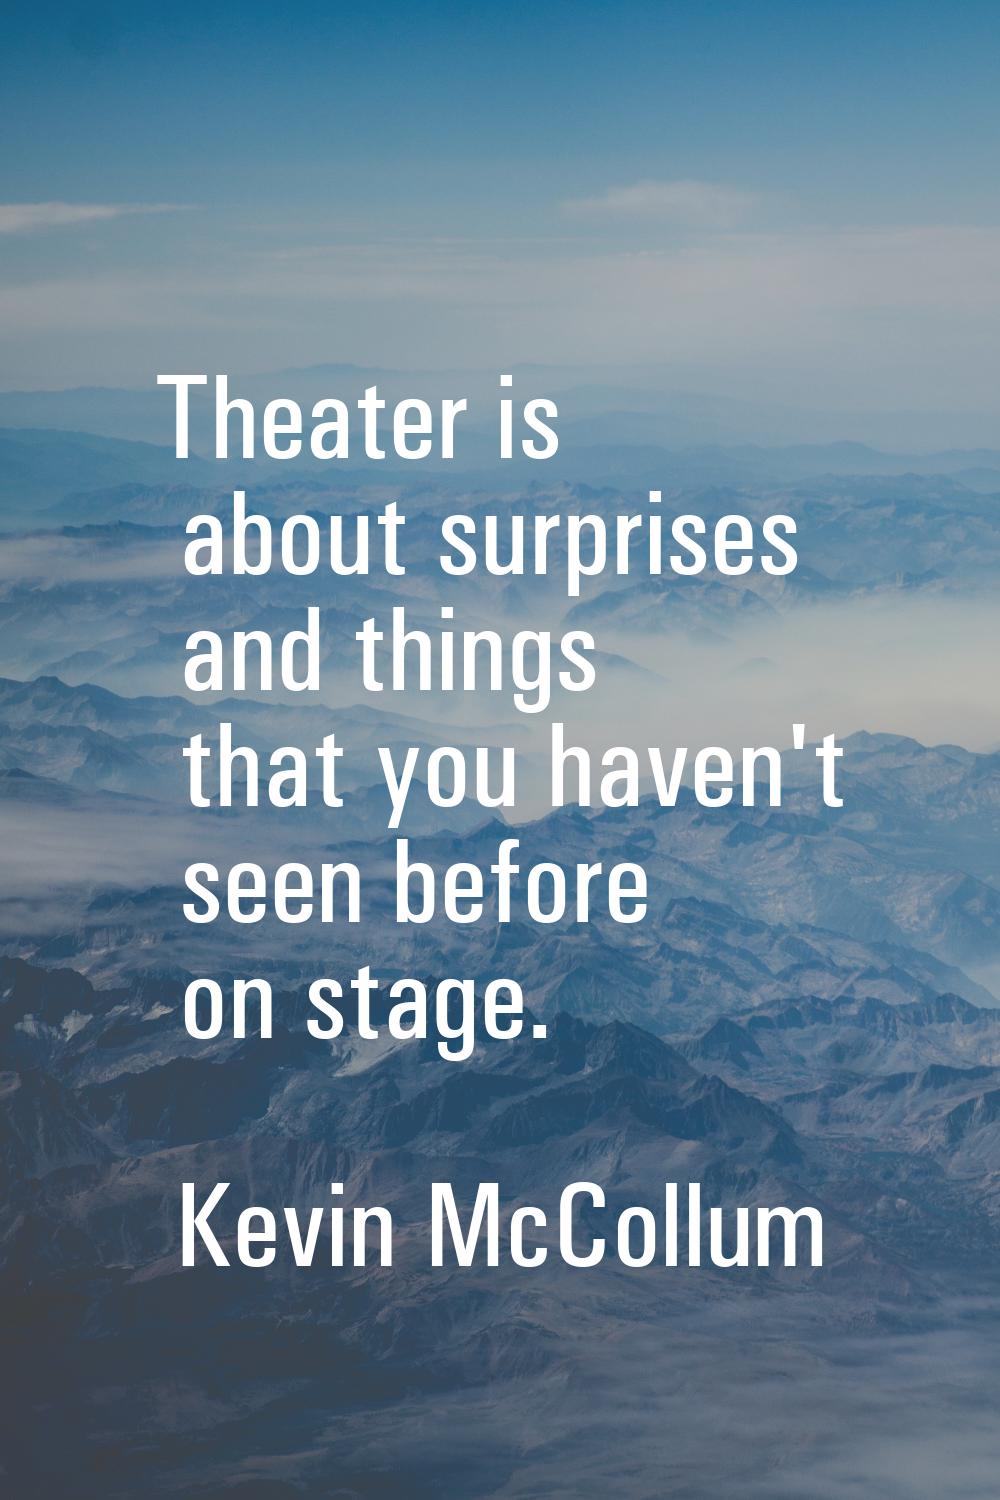 Theater is about surprises and things that you haven't seen before on stage.